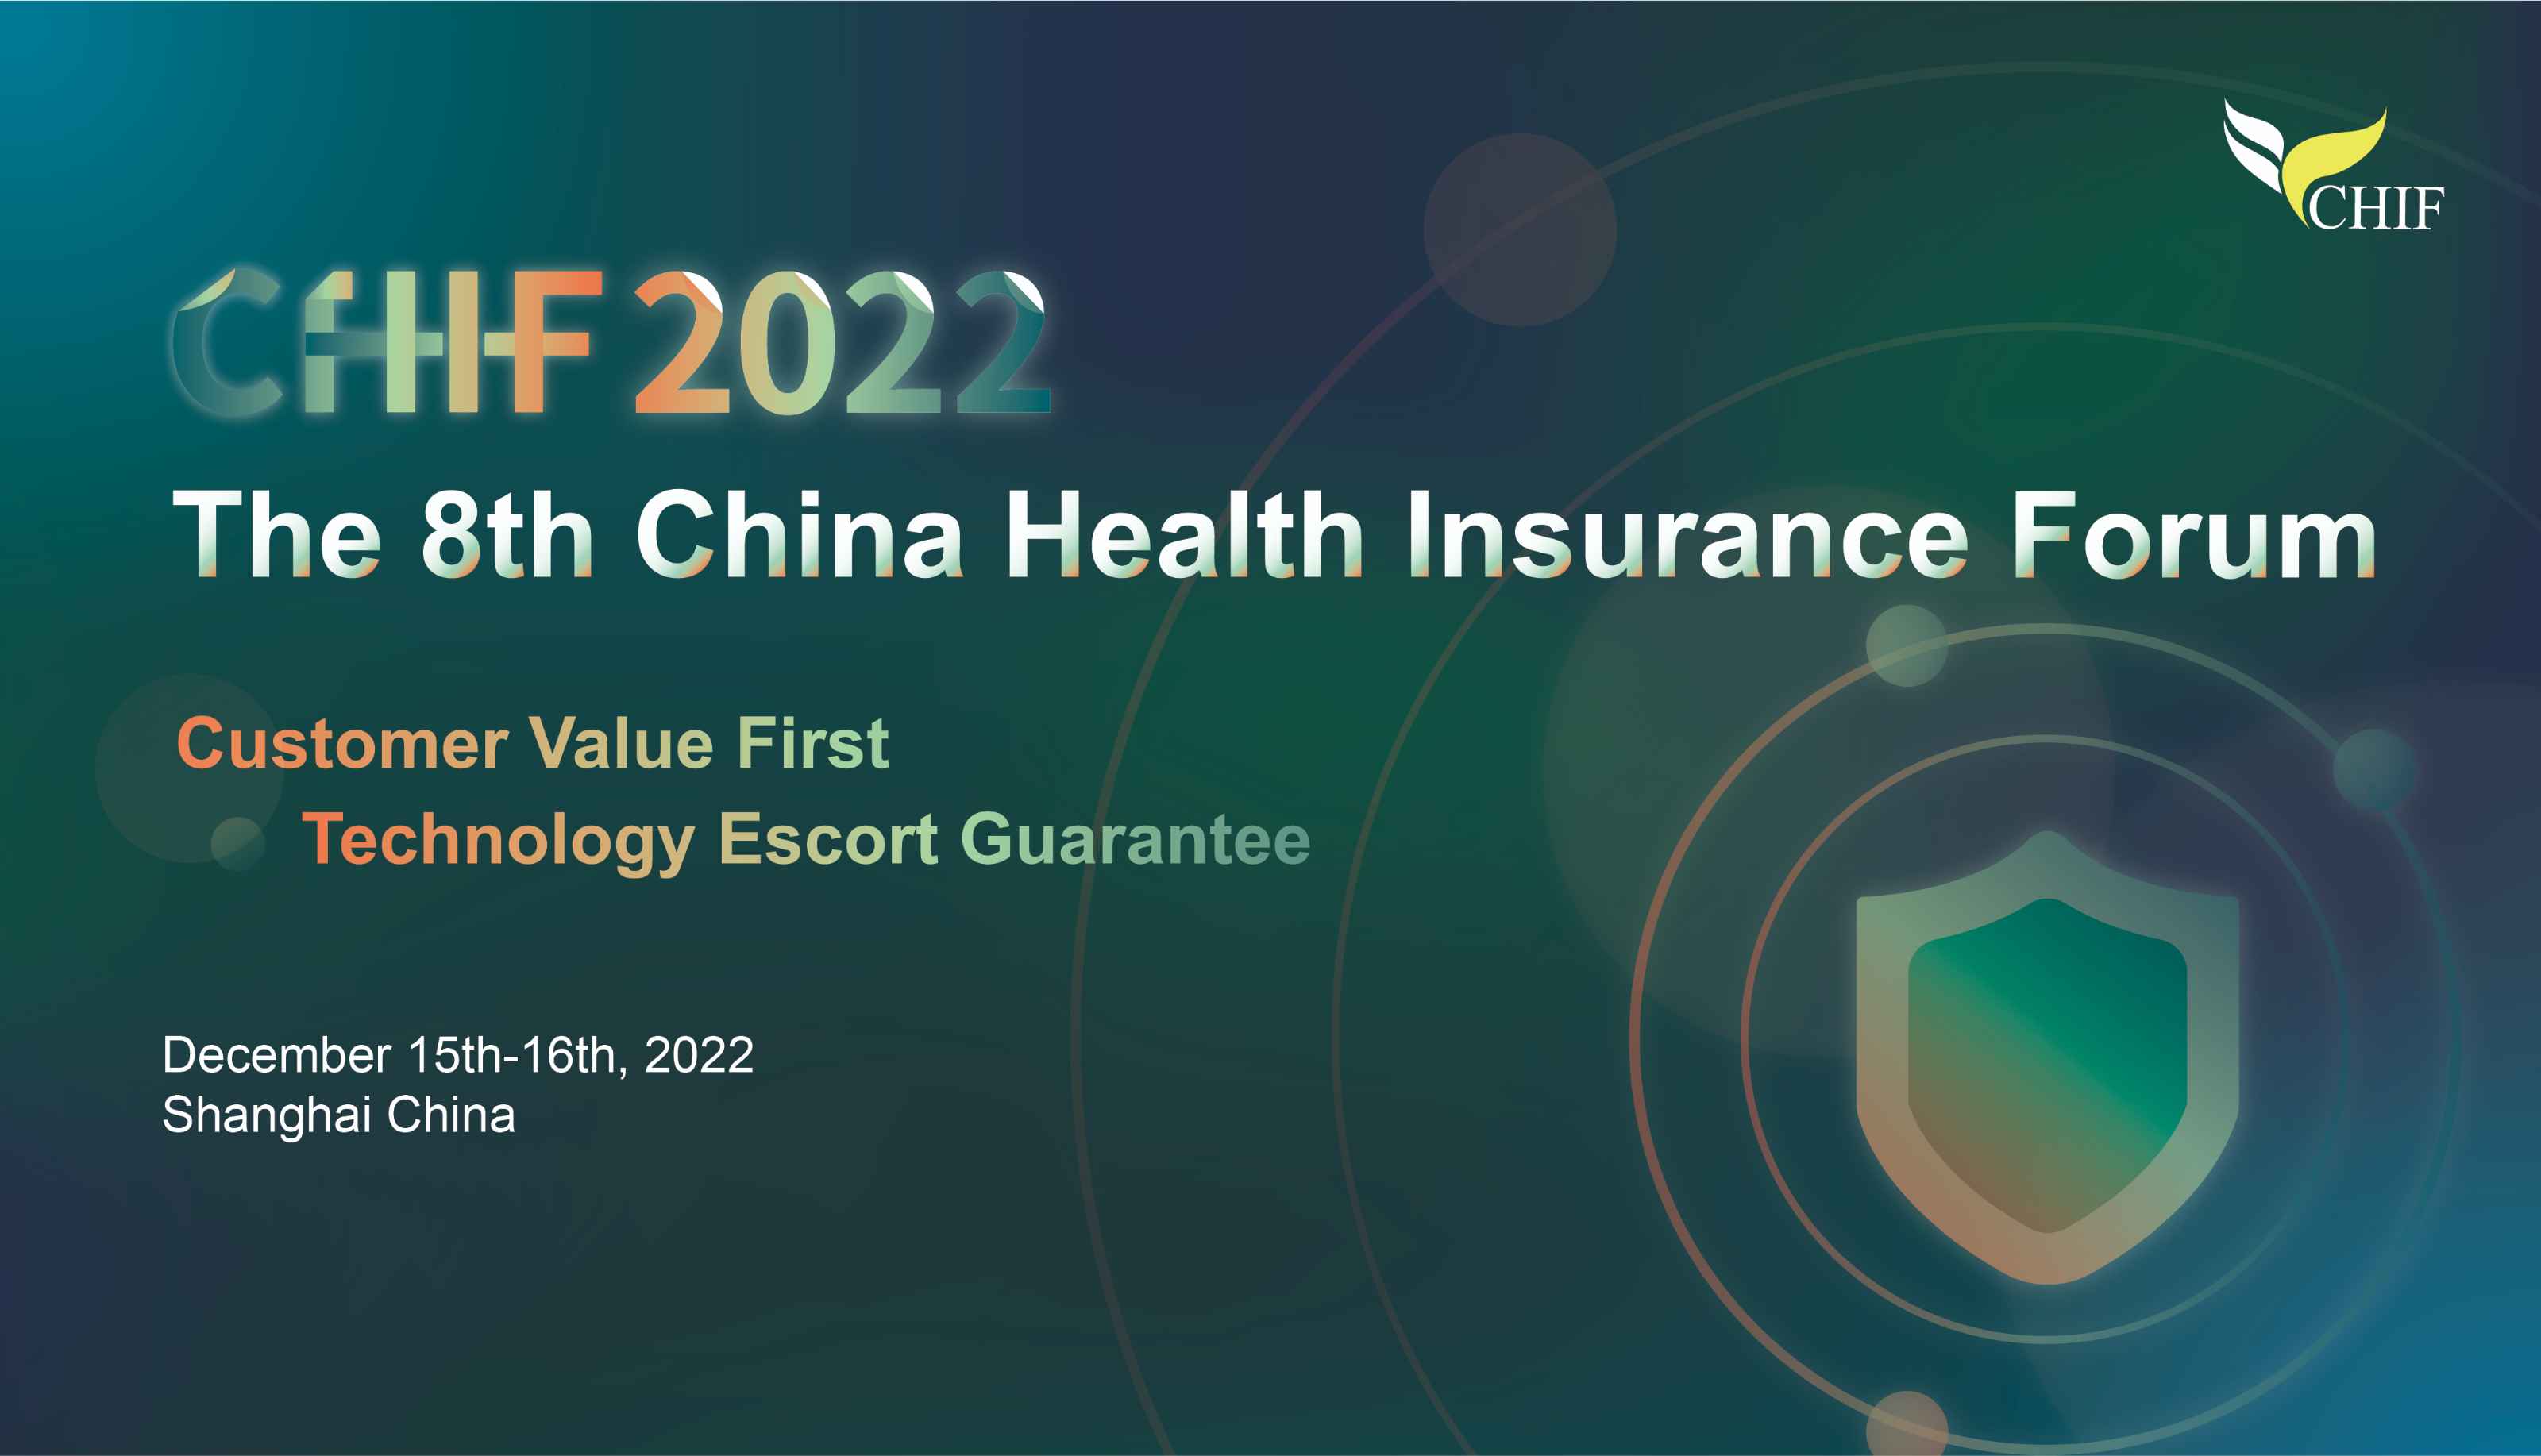 The 8th China Health Insurance Forum 2022